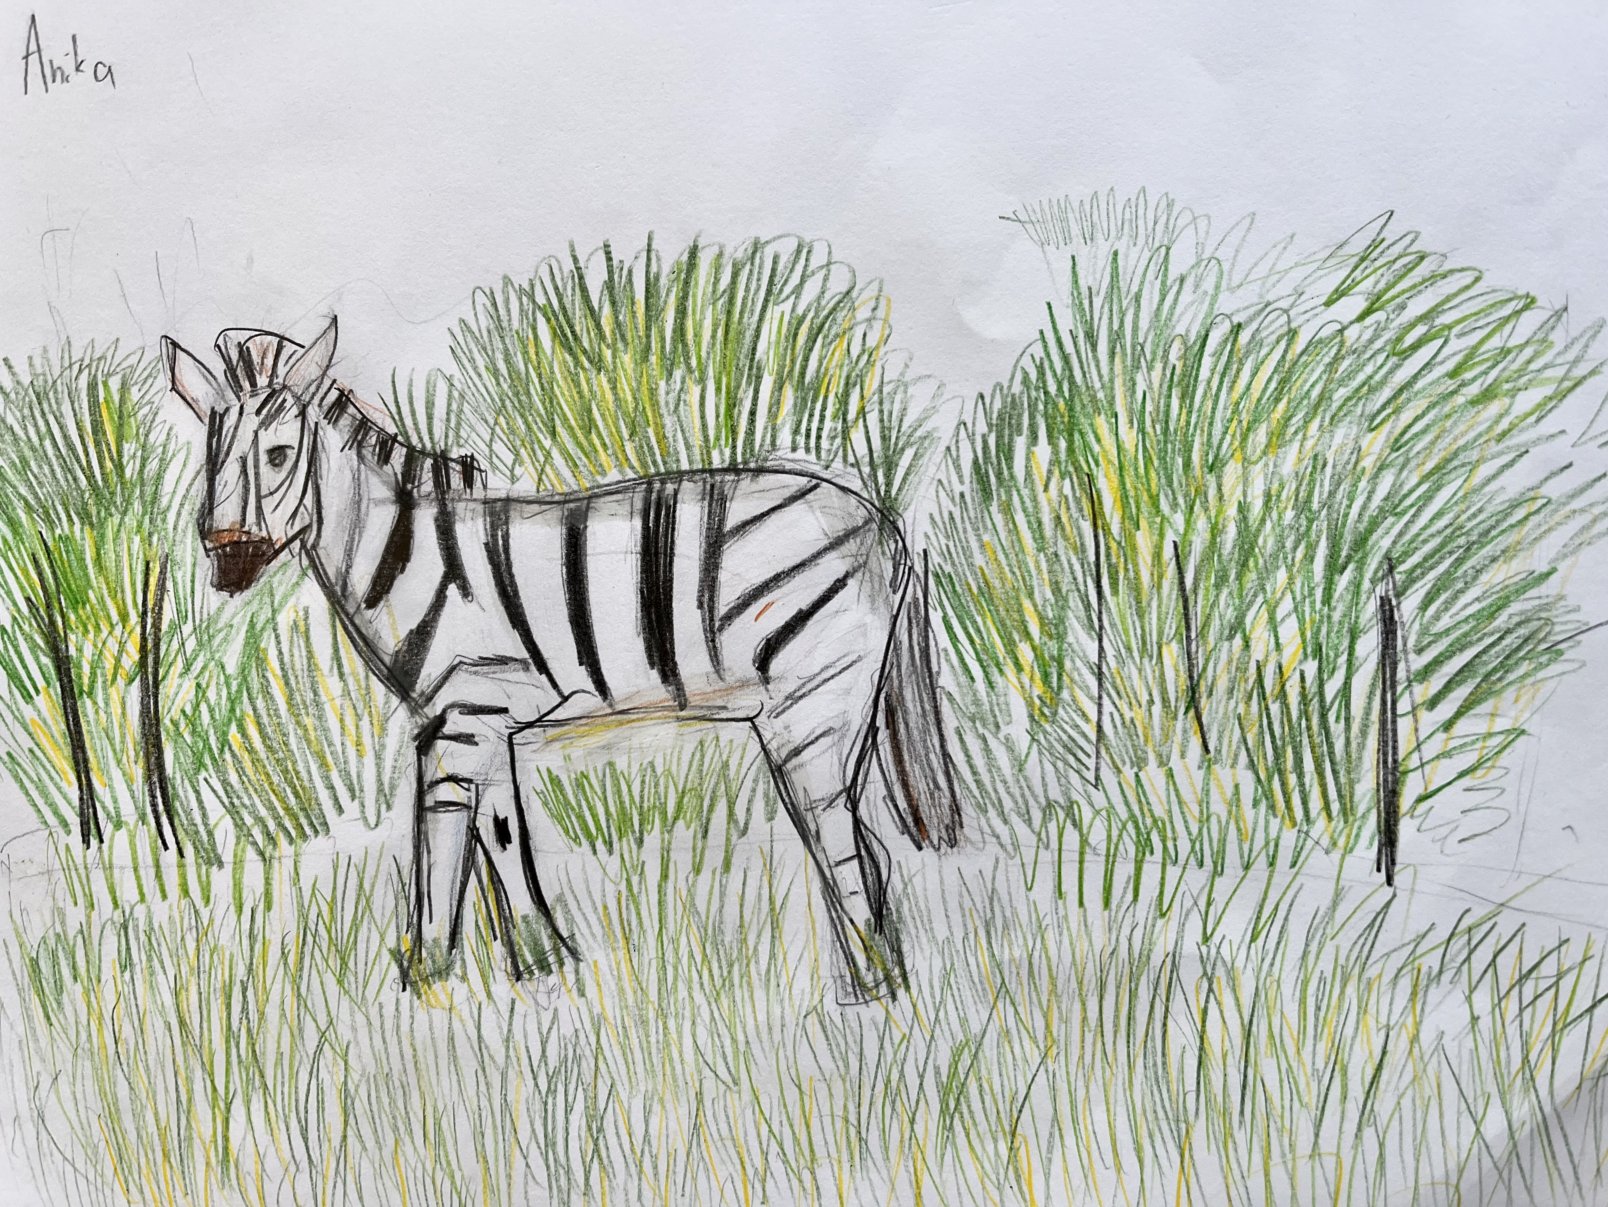 A zebra in front of green bushes